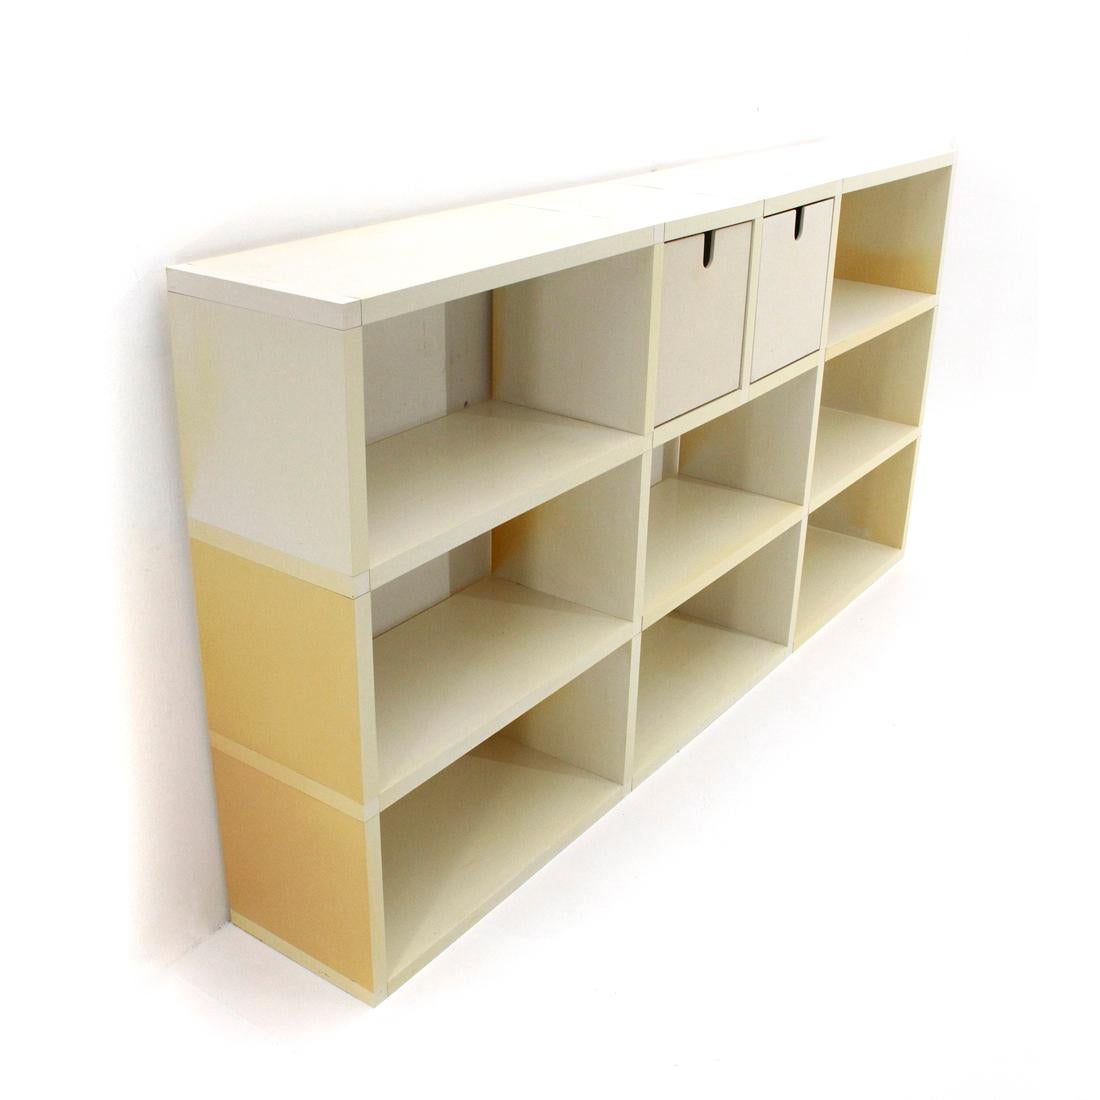 Library produced in the 1970s by Kartell, designed by Giulio Polvara.
Structure in plastic elements of various lengths that can be joined together.
Two cubes in expanded polyurethane containers.
Structure in good condition, marks and halos due to